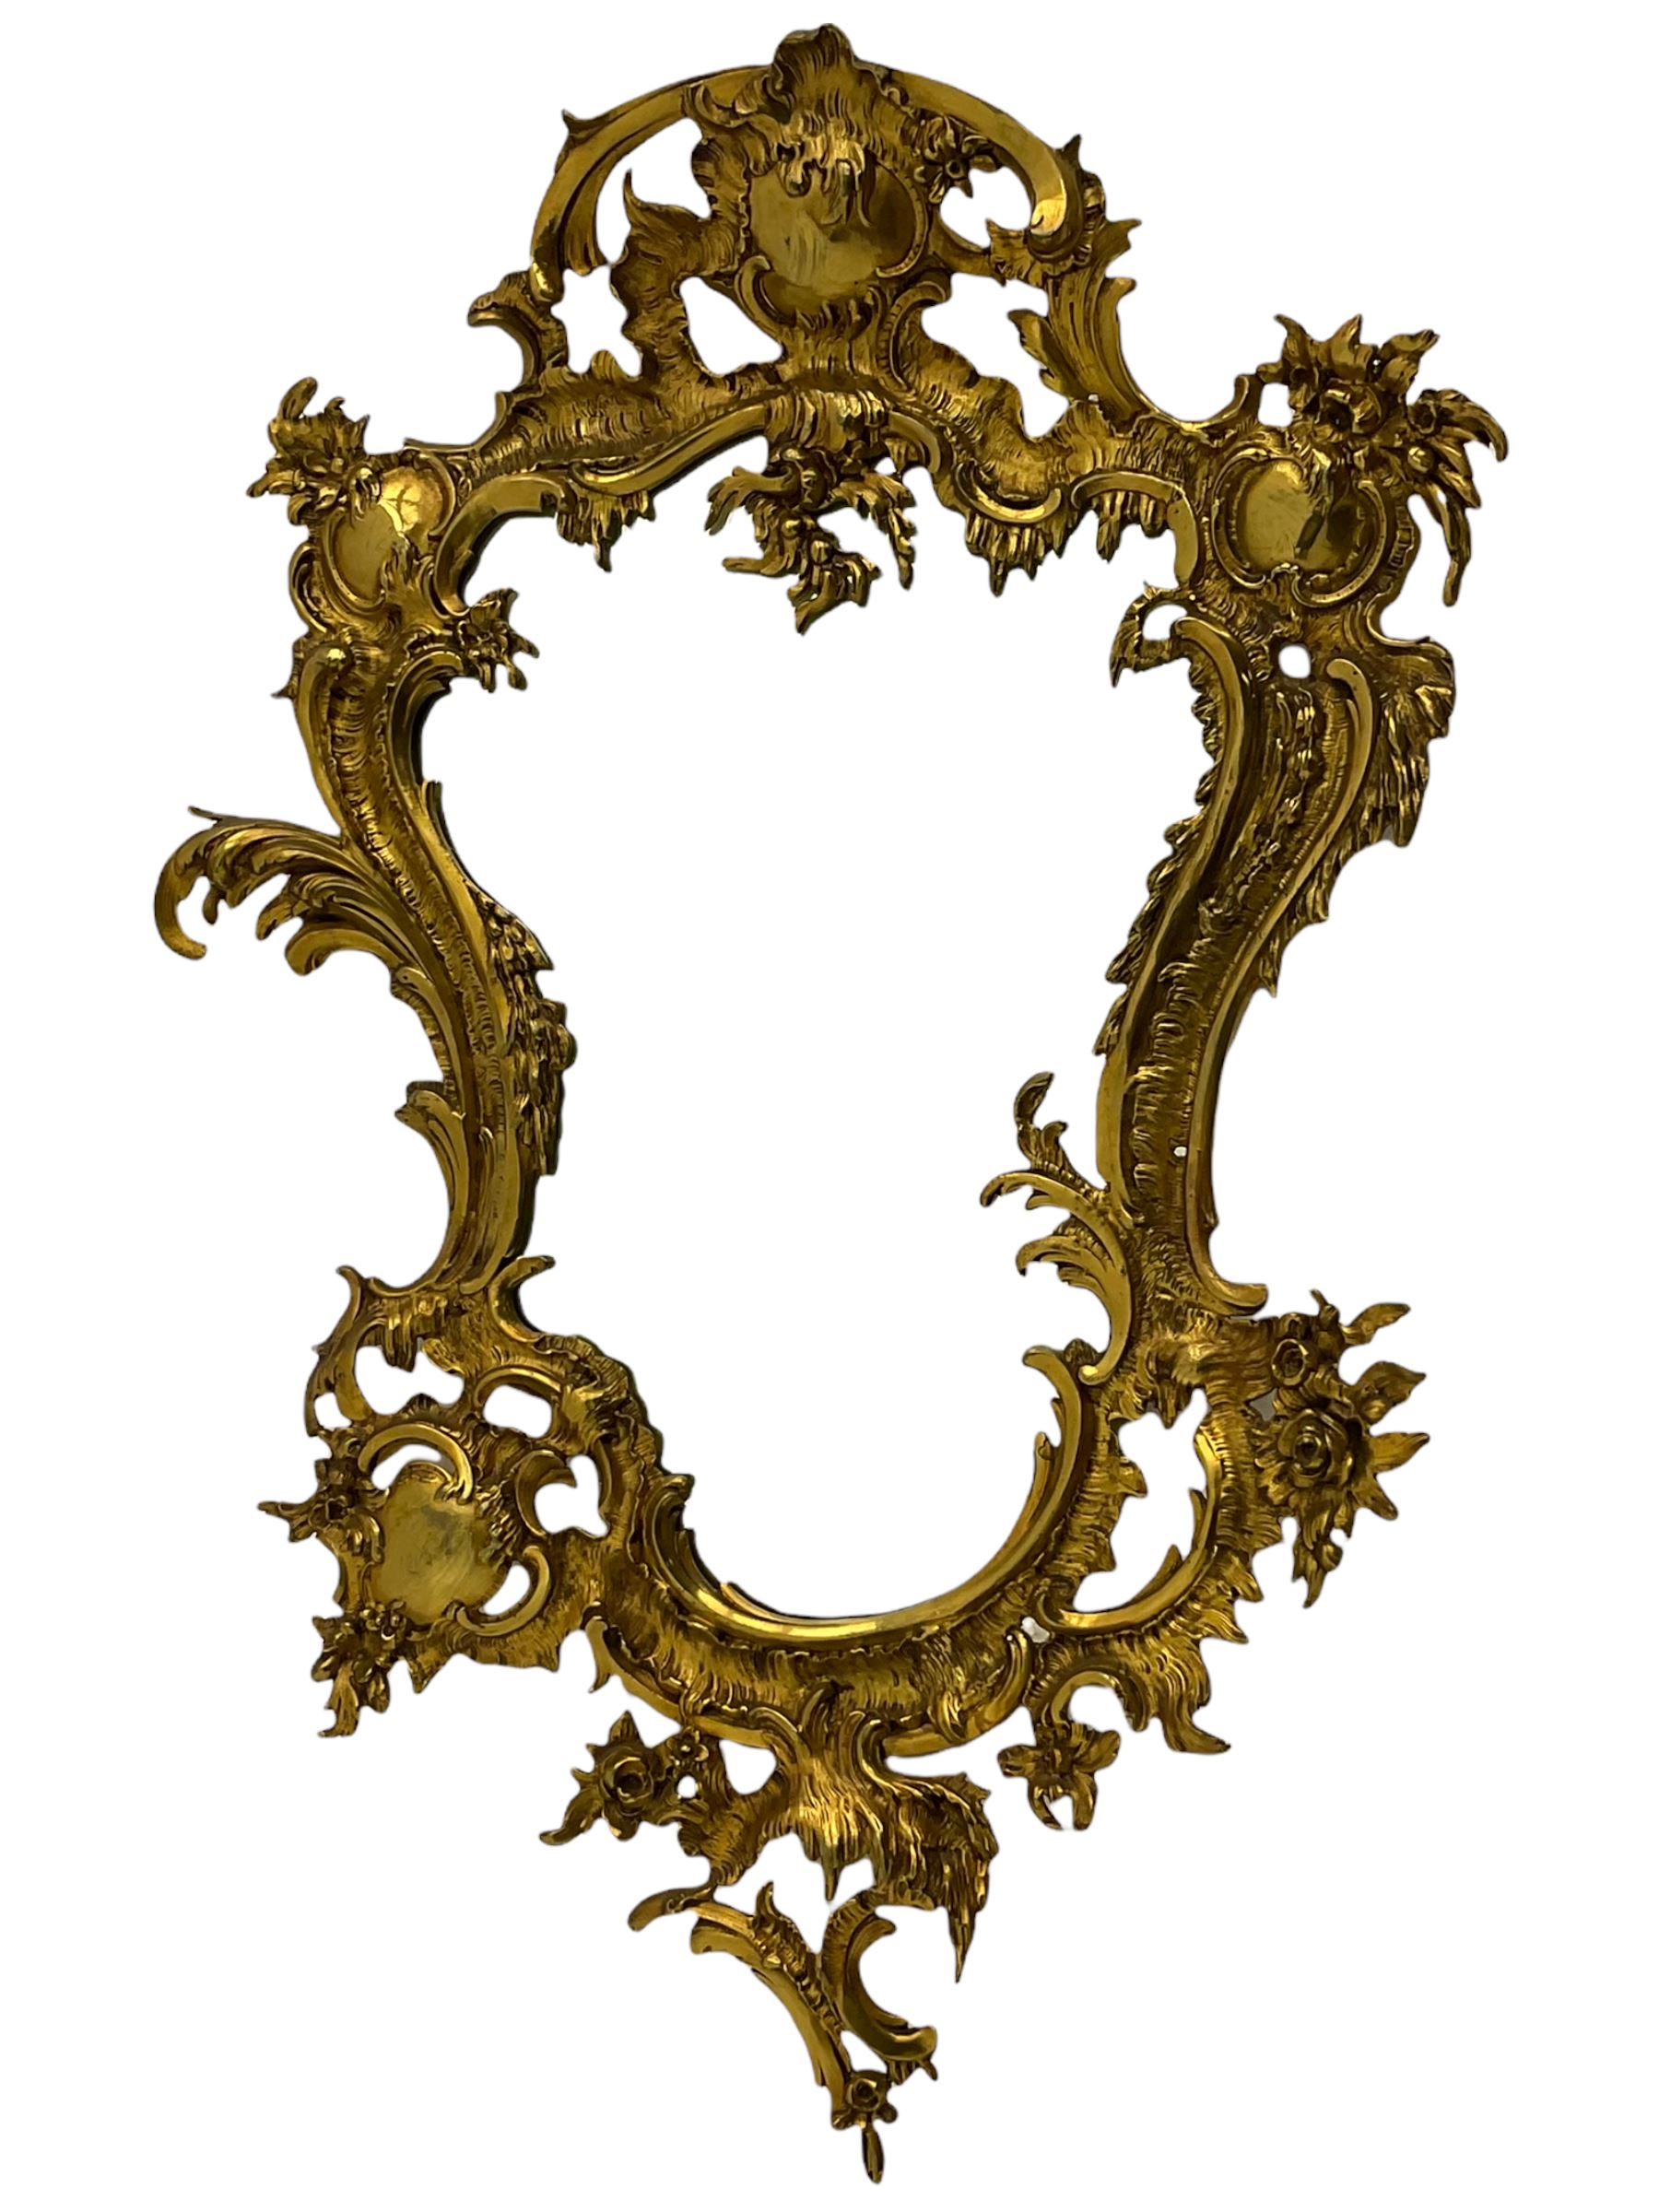 Rococo style ornate cast brass wall mirror - Image 5 of 5